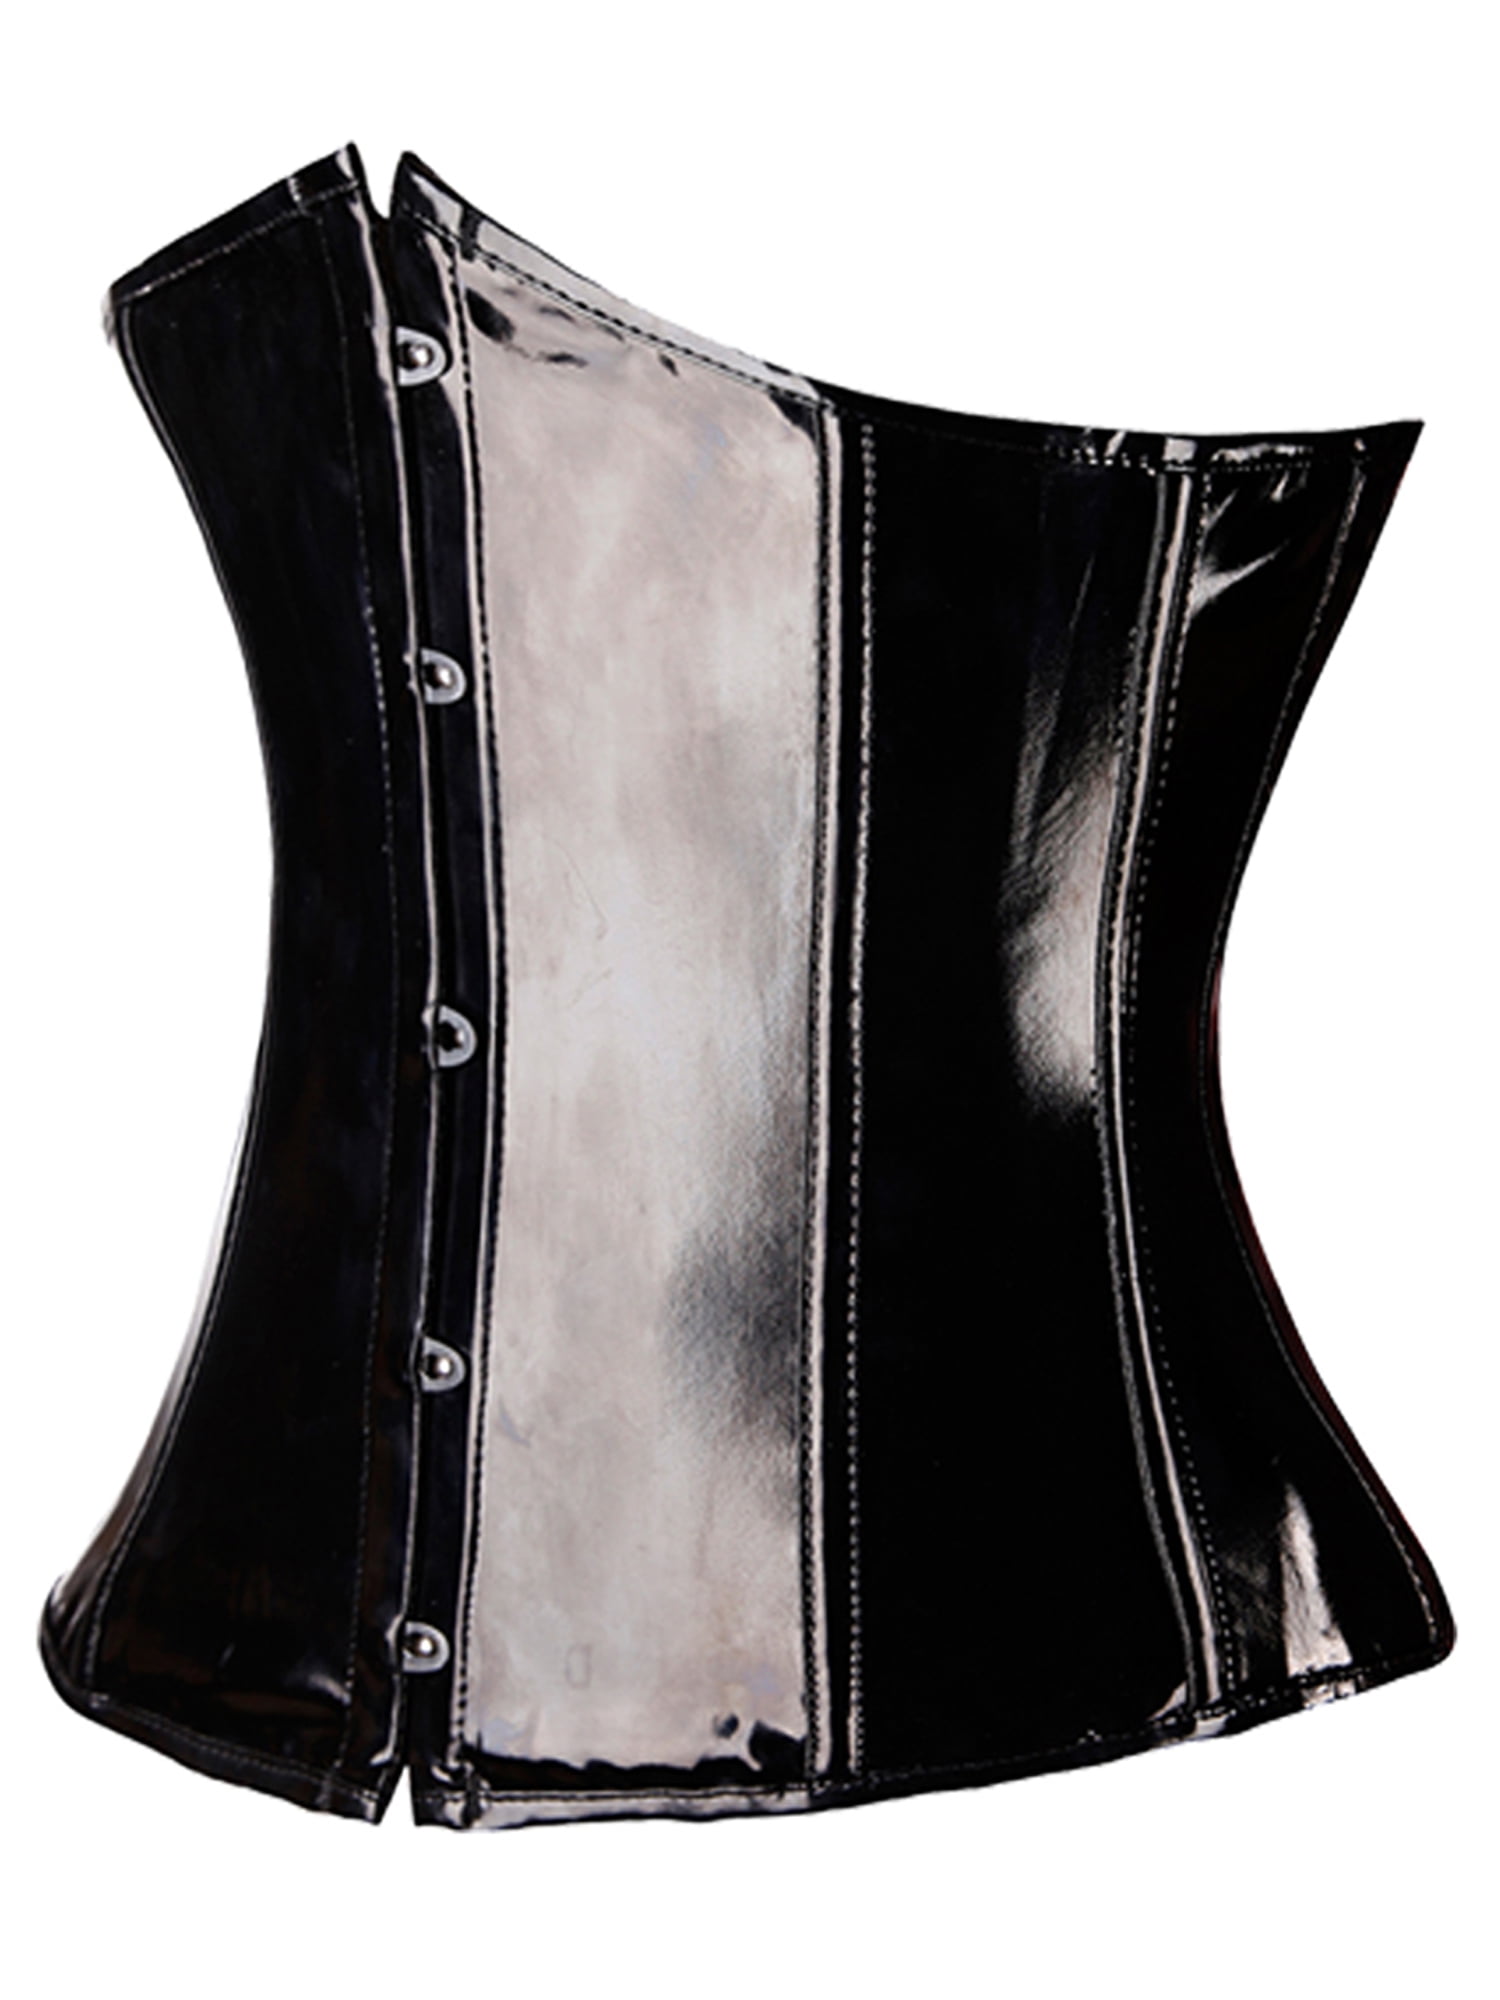 DODOING Corsets Intimates Black Faux Leather Steampunk Gothic